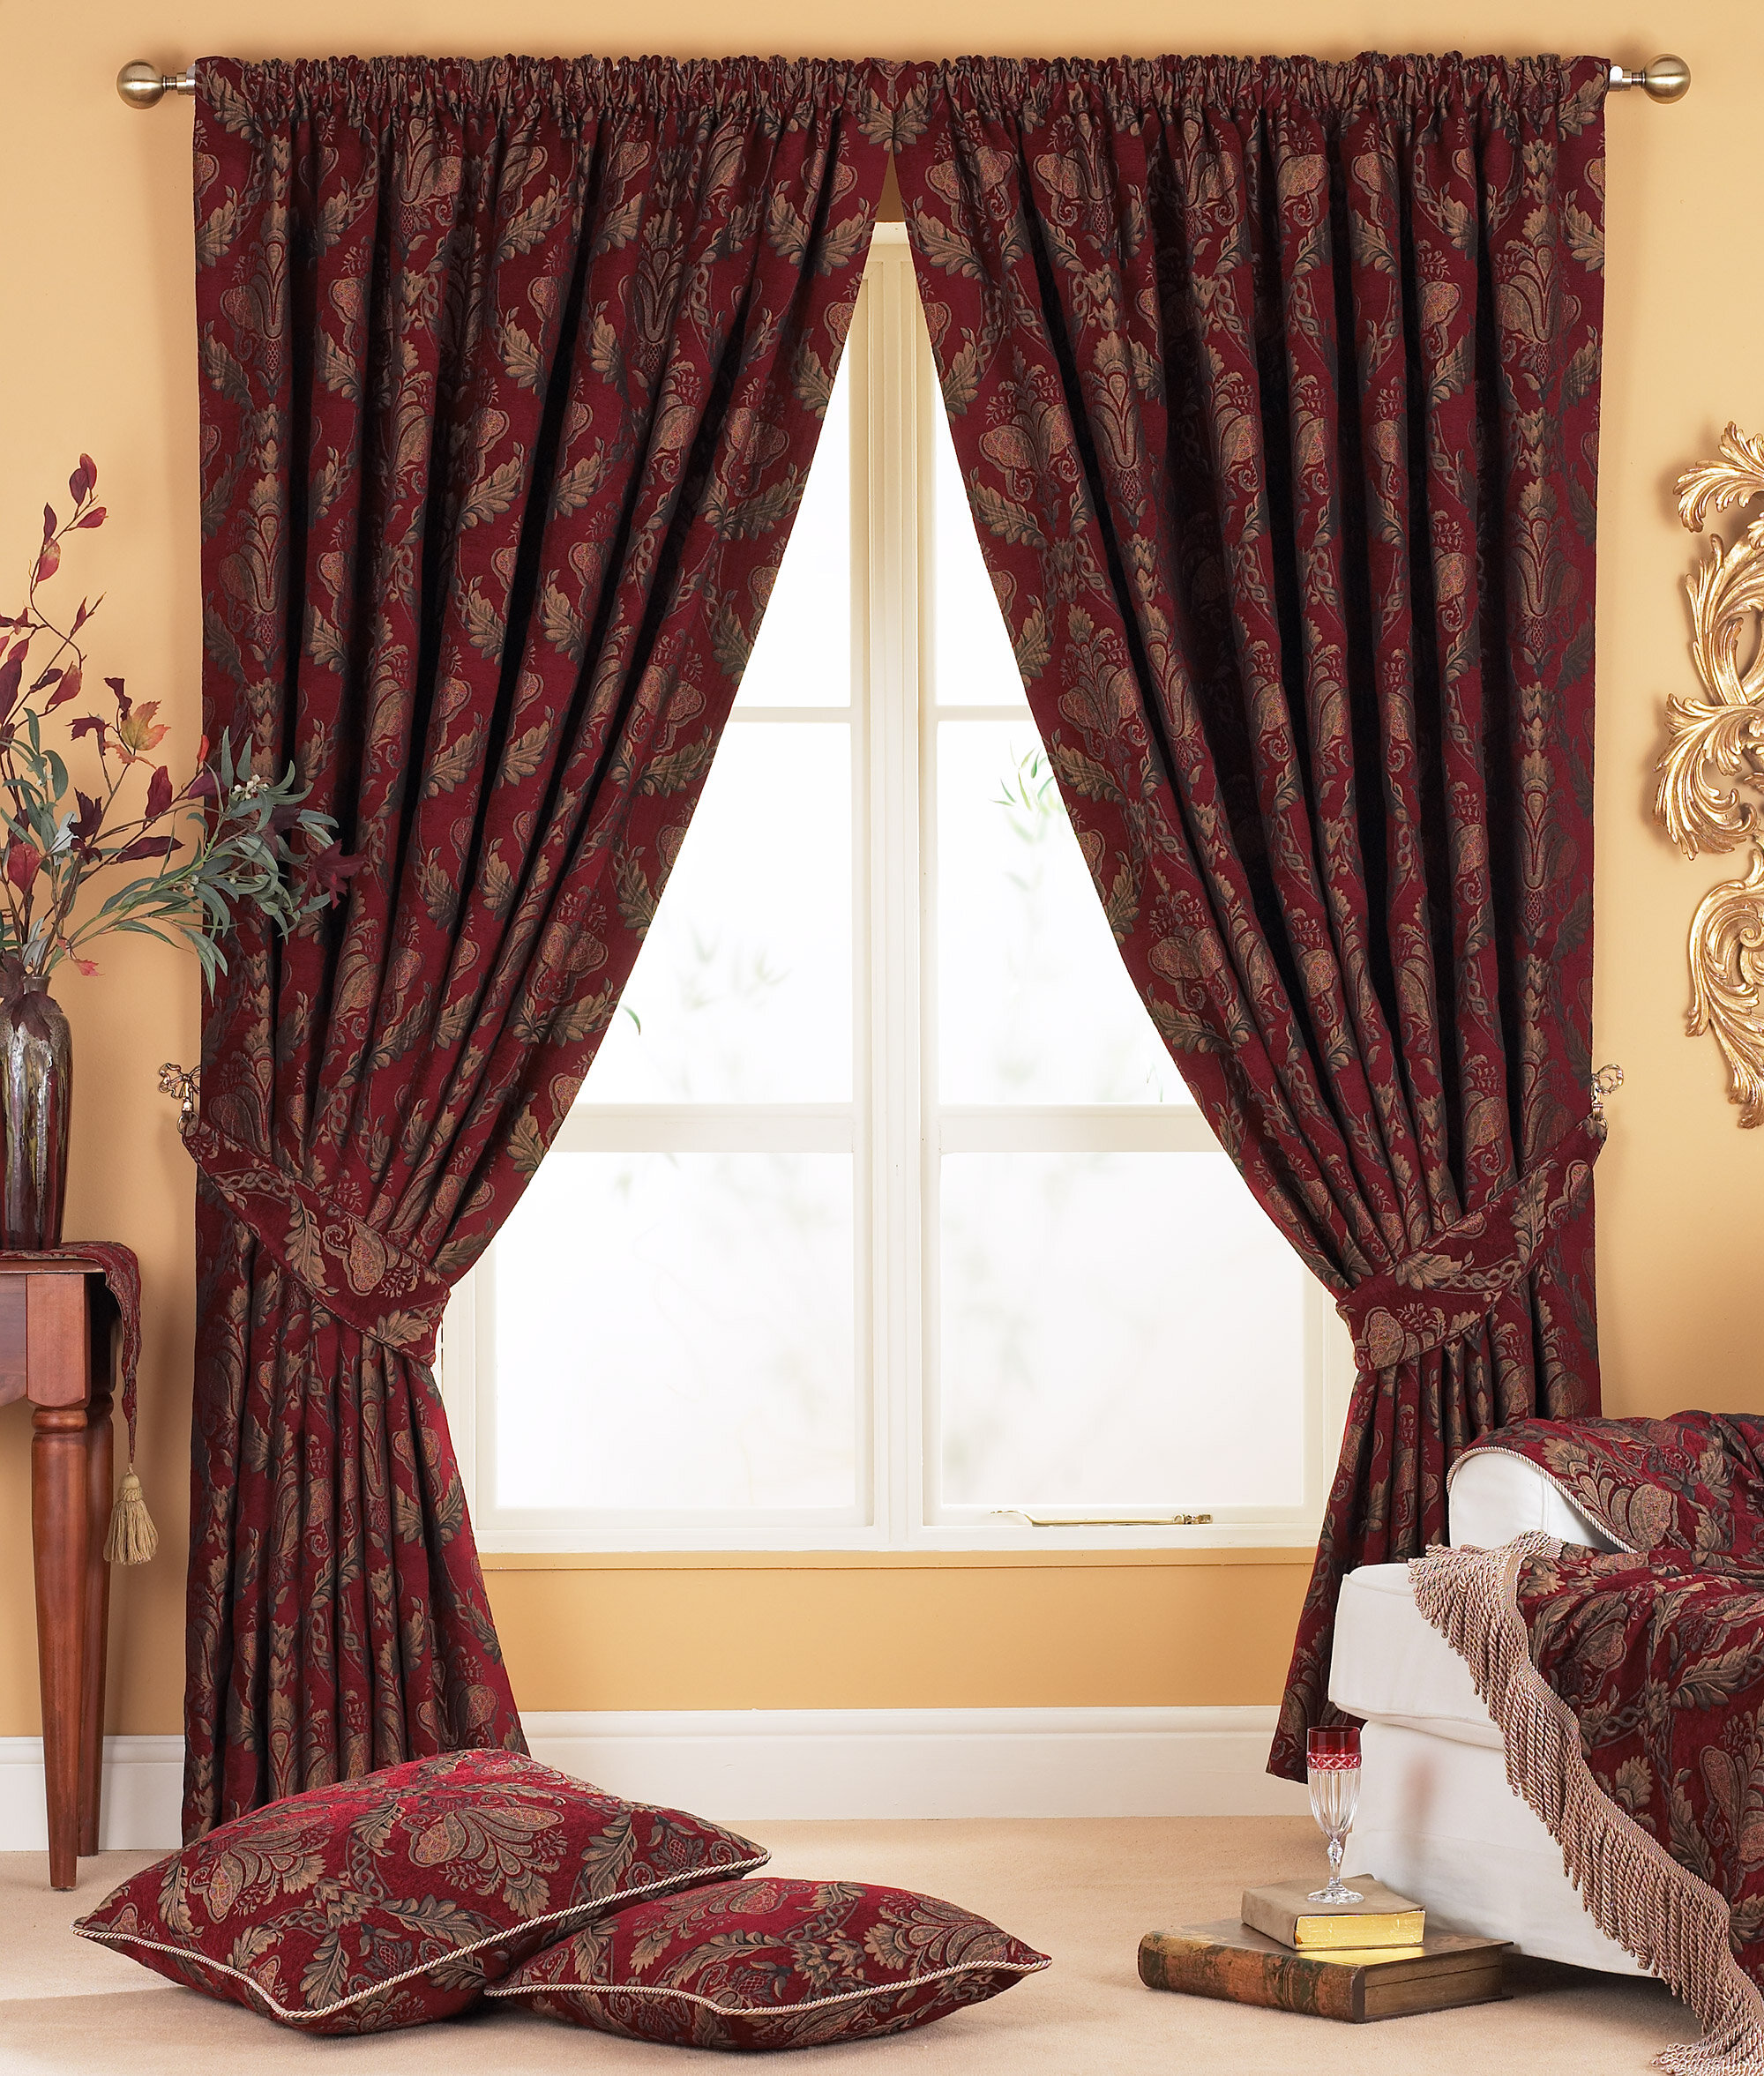 New Pencil Pleat Heavy Jacquard Tape Top Curtains Fully Lined For Hooks & Poles 